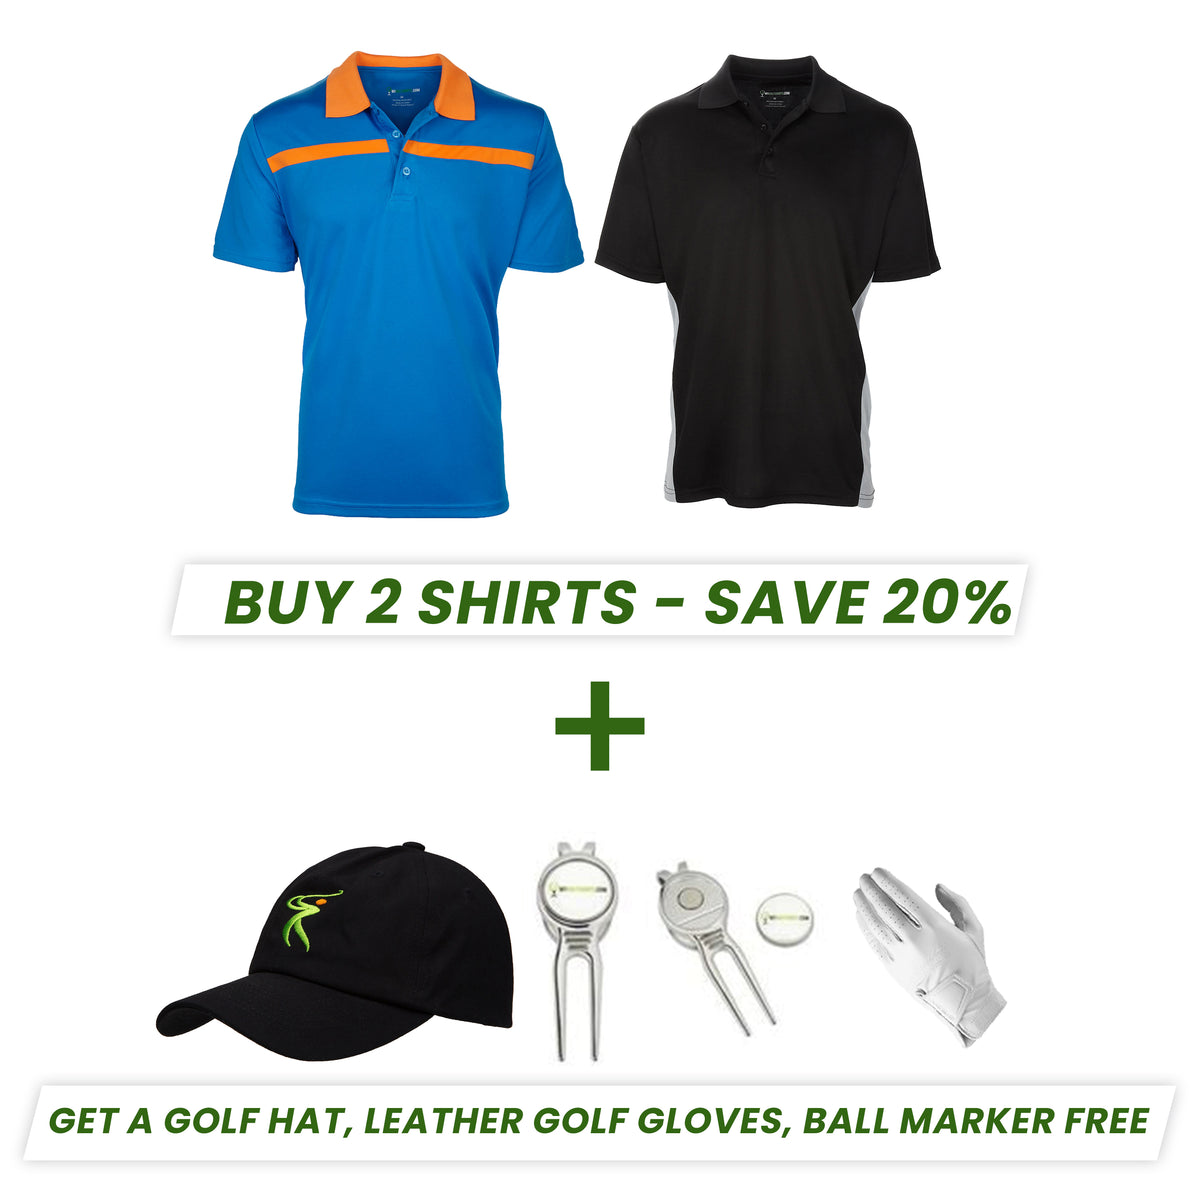 BUY 2 DRI-FIT GOLF SHIRTS(MEN'S BOLD LINE) Save 20 % (ALSO GET FREE BALL MARKER, HAT AND FREE SHIPPING) - My Golf Shirts